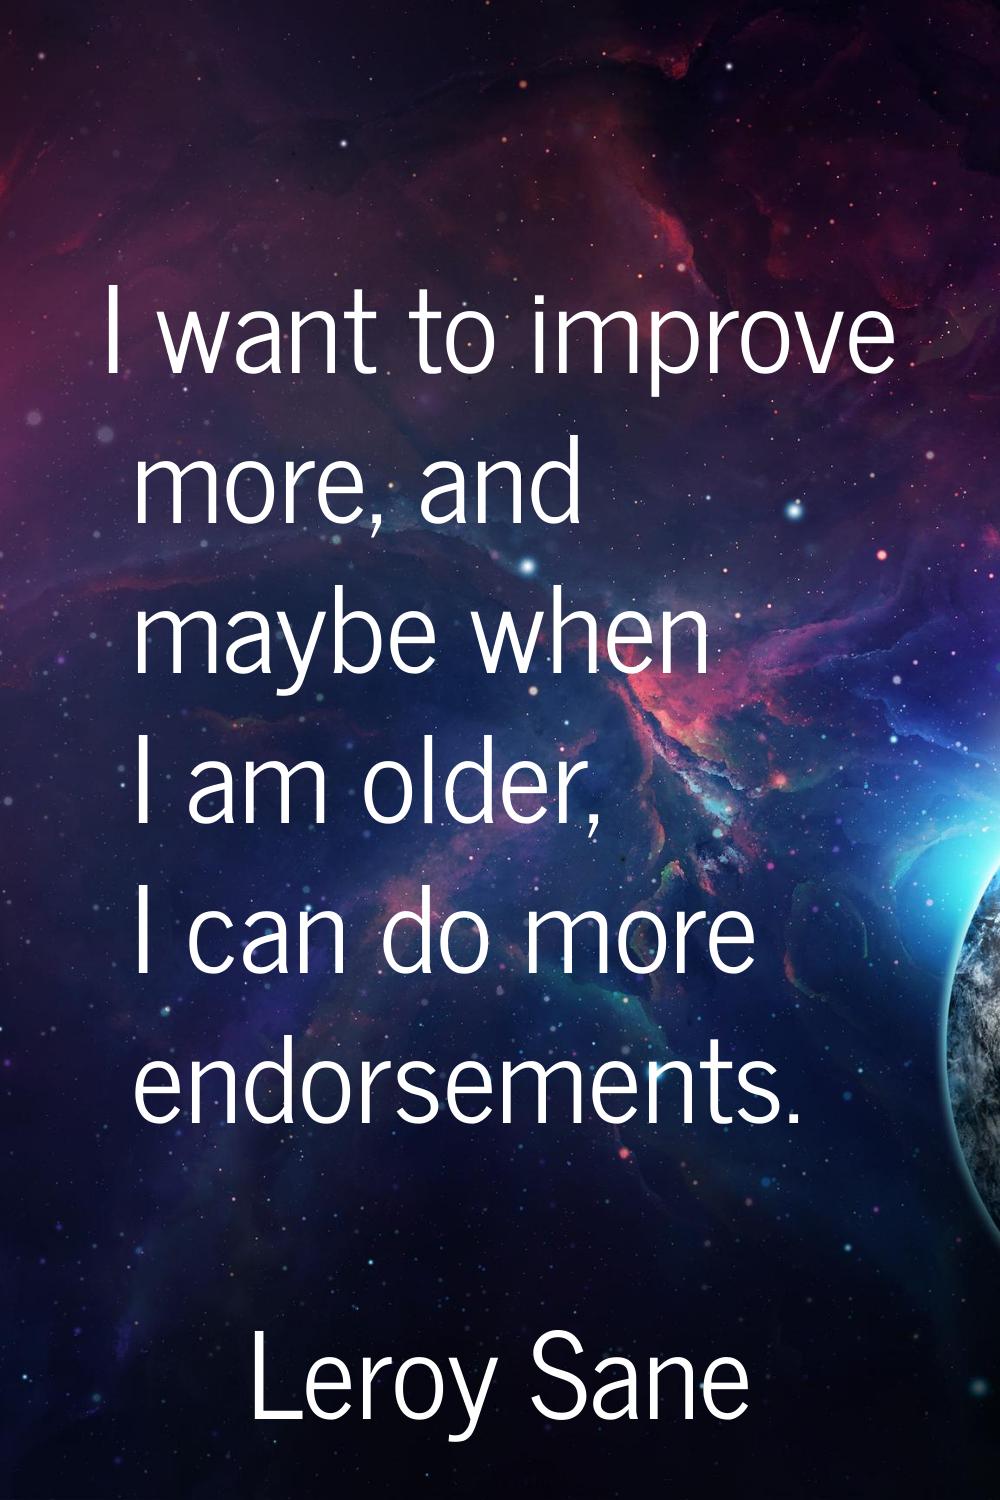 I want to improve more, and maybe when I am older, I can do more endorsements.